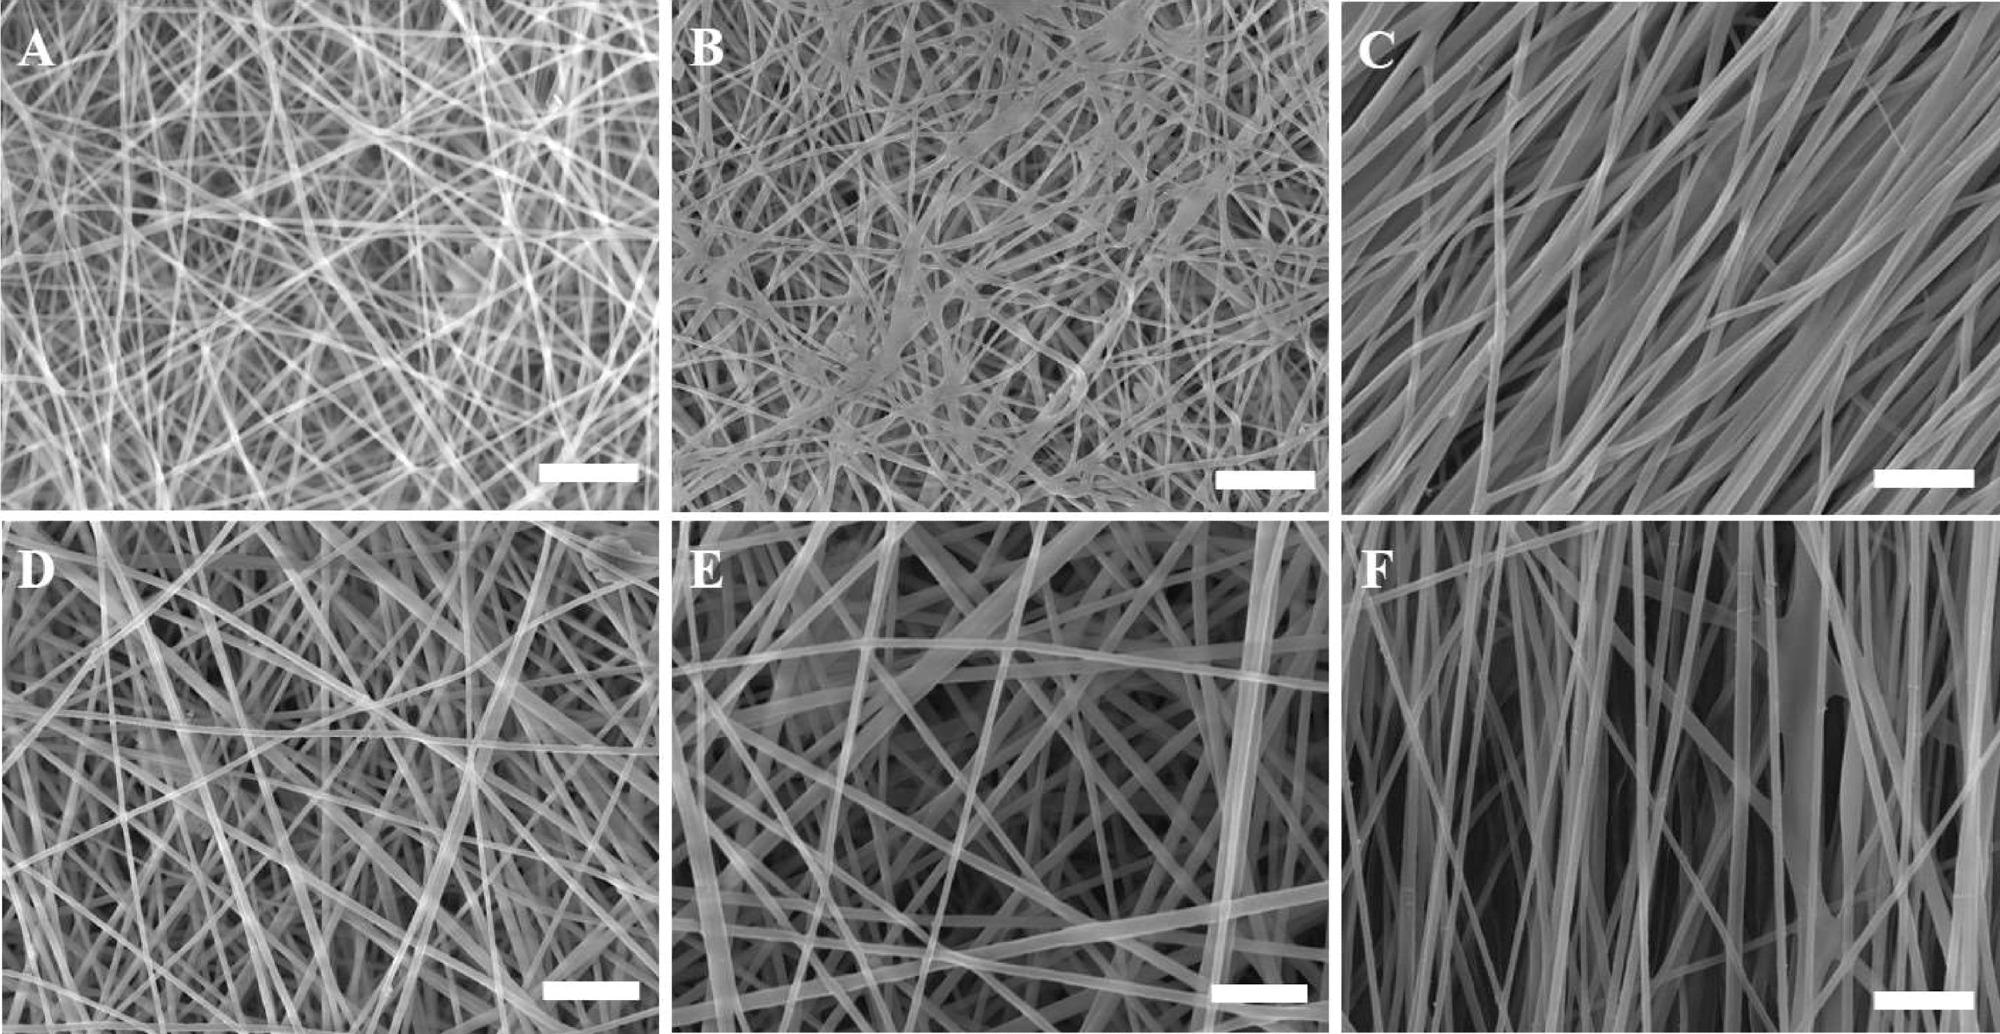 SEM micrographs of non-aligned (random) and aligned electrospun nanofibrous scaffolds showing the effect of various electrospinning processing parameters on the fiber diameter of the scaffolds. (A) R-R1-C2P1, (B) R-R4-C2P1, (C) A-R4-C2P1, (D) R-R1-C4P1, (E) R-R4-C4P1, and (F) A-R4-C4P1.